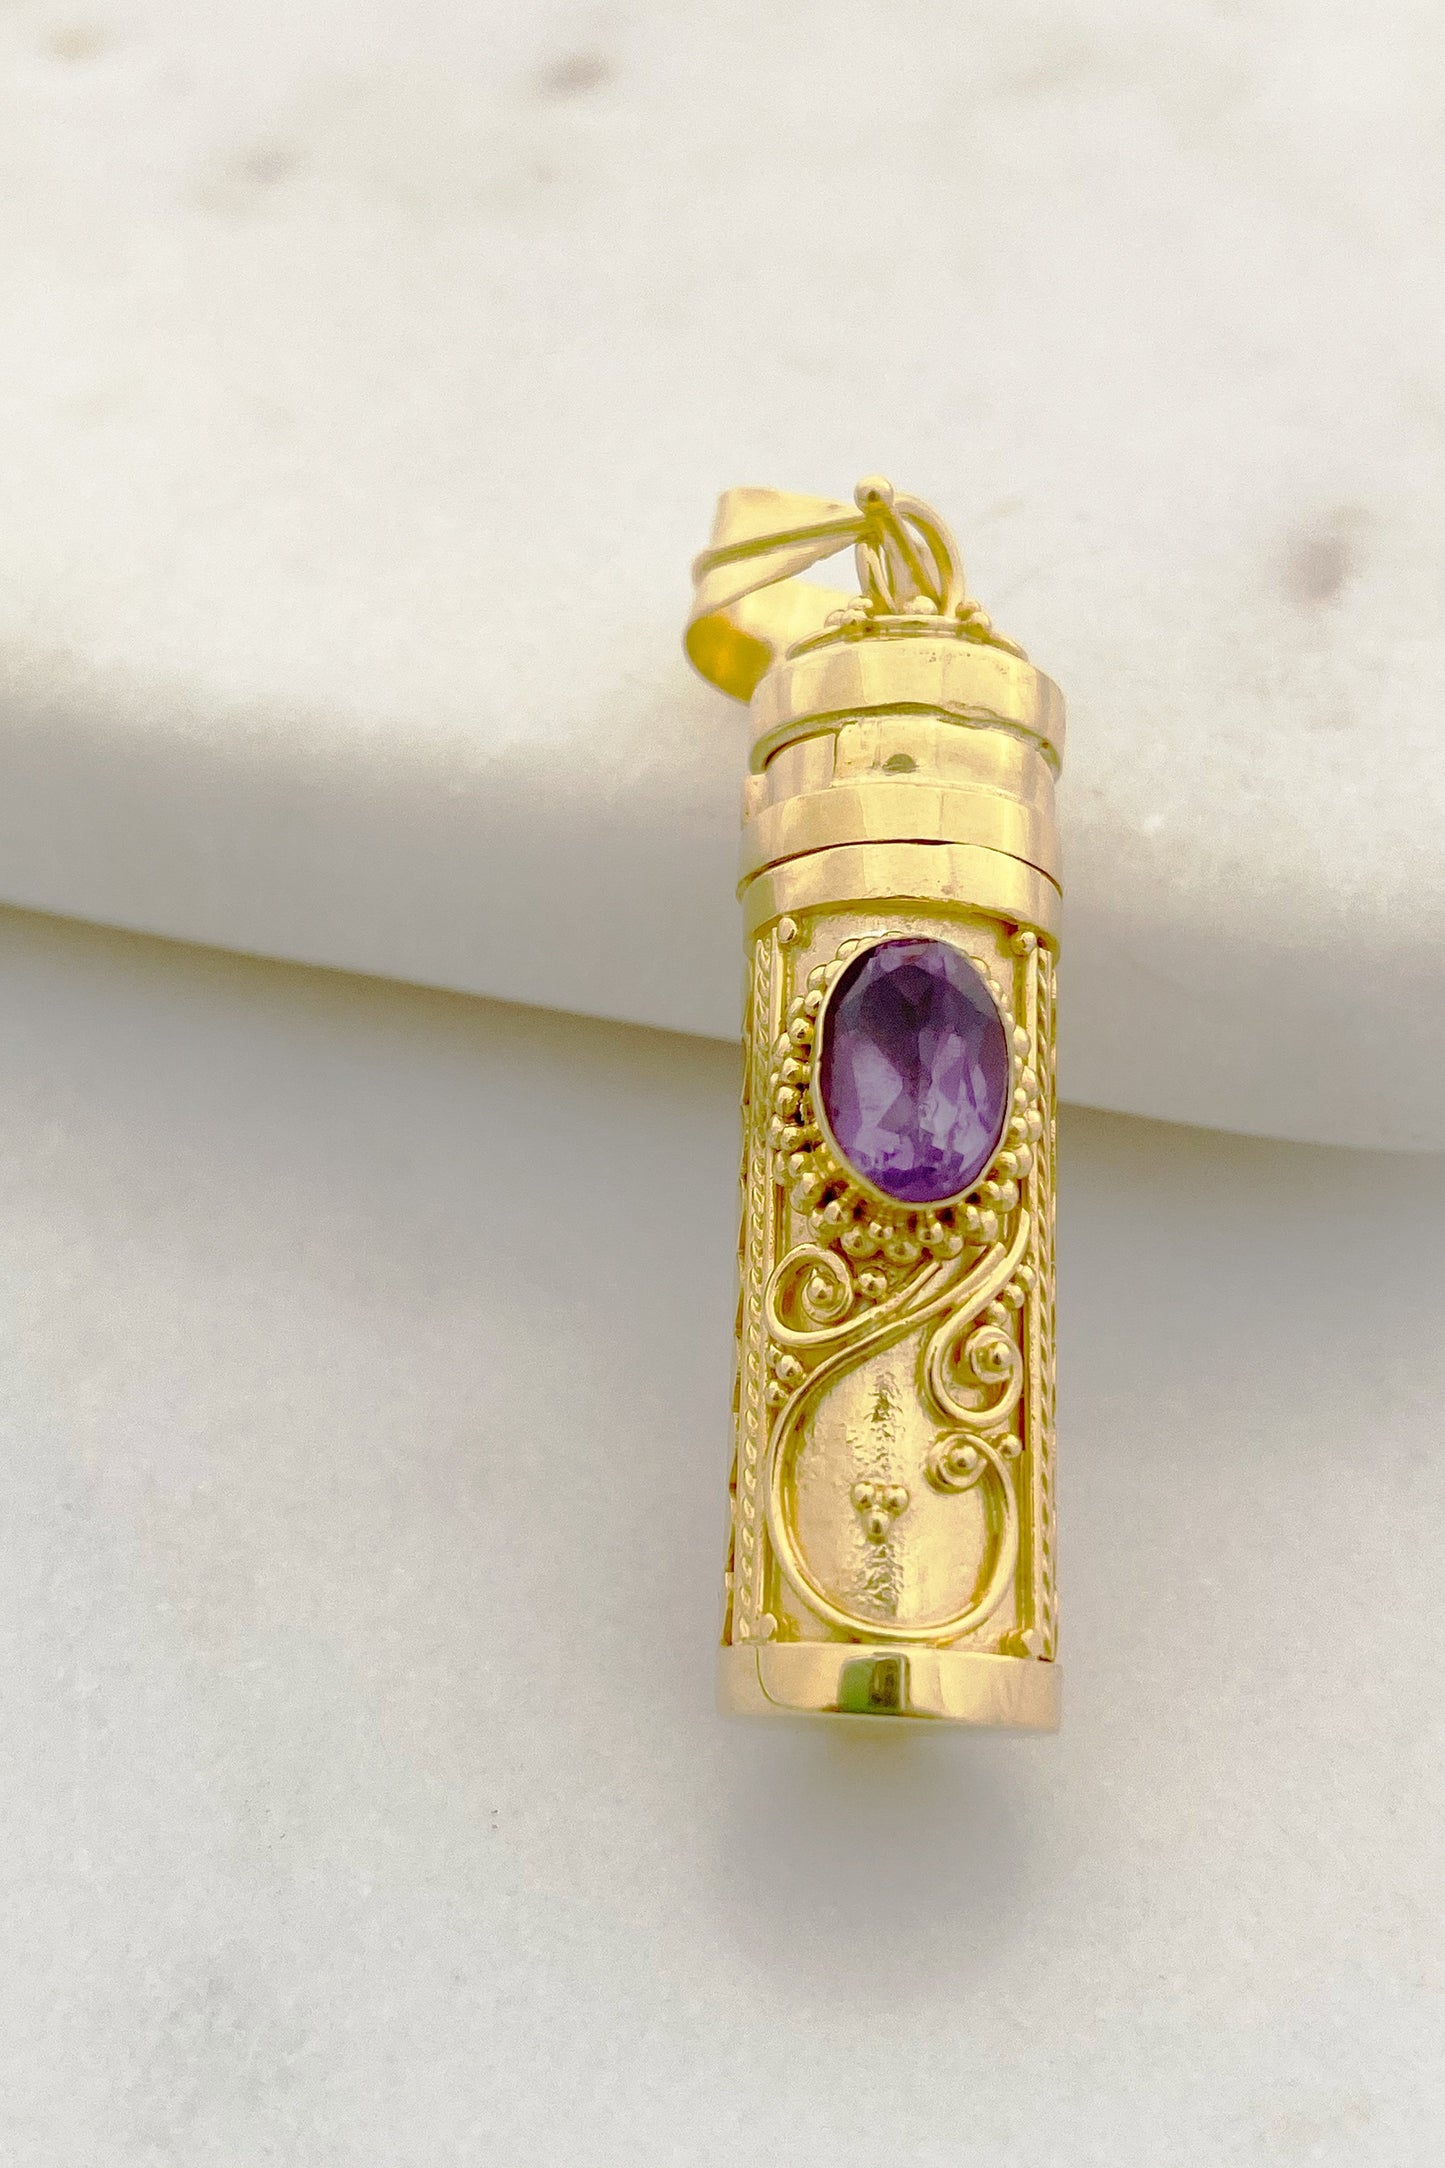 Chain-less Amethyst Wishing Locket on an uneven surface